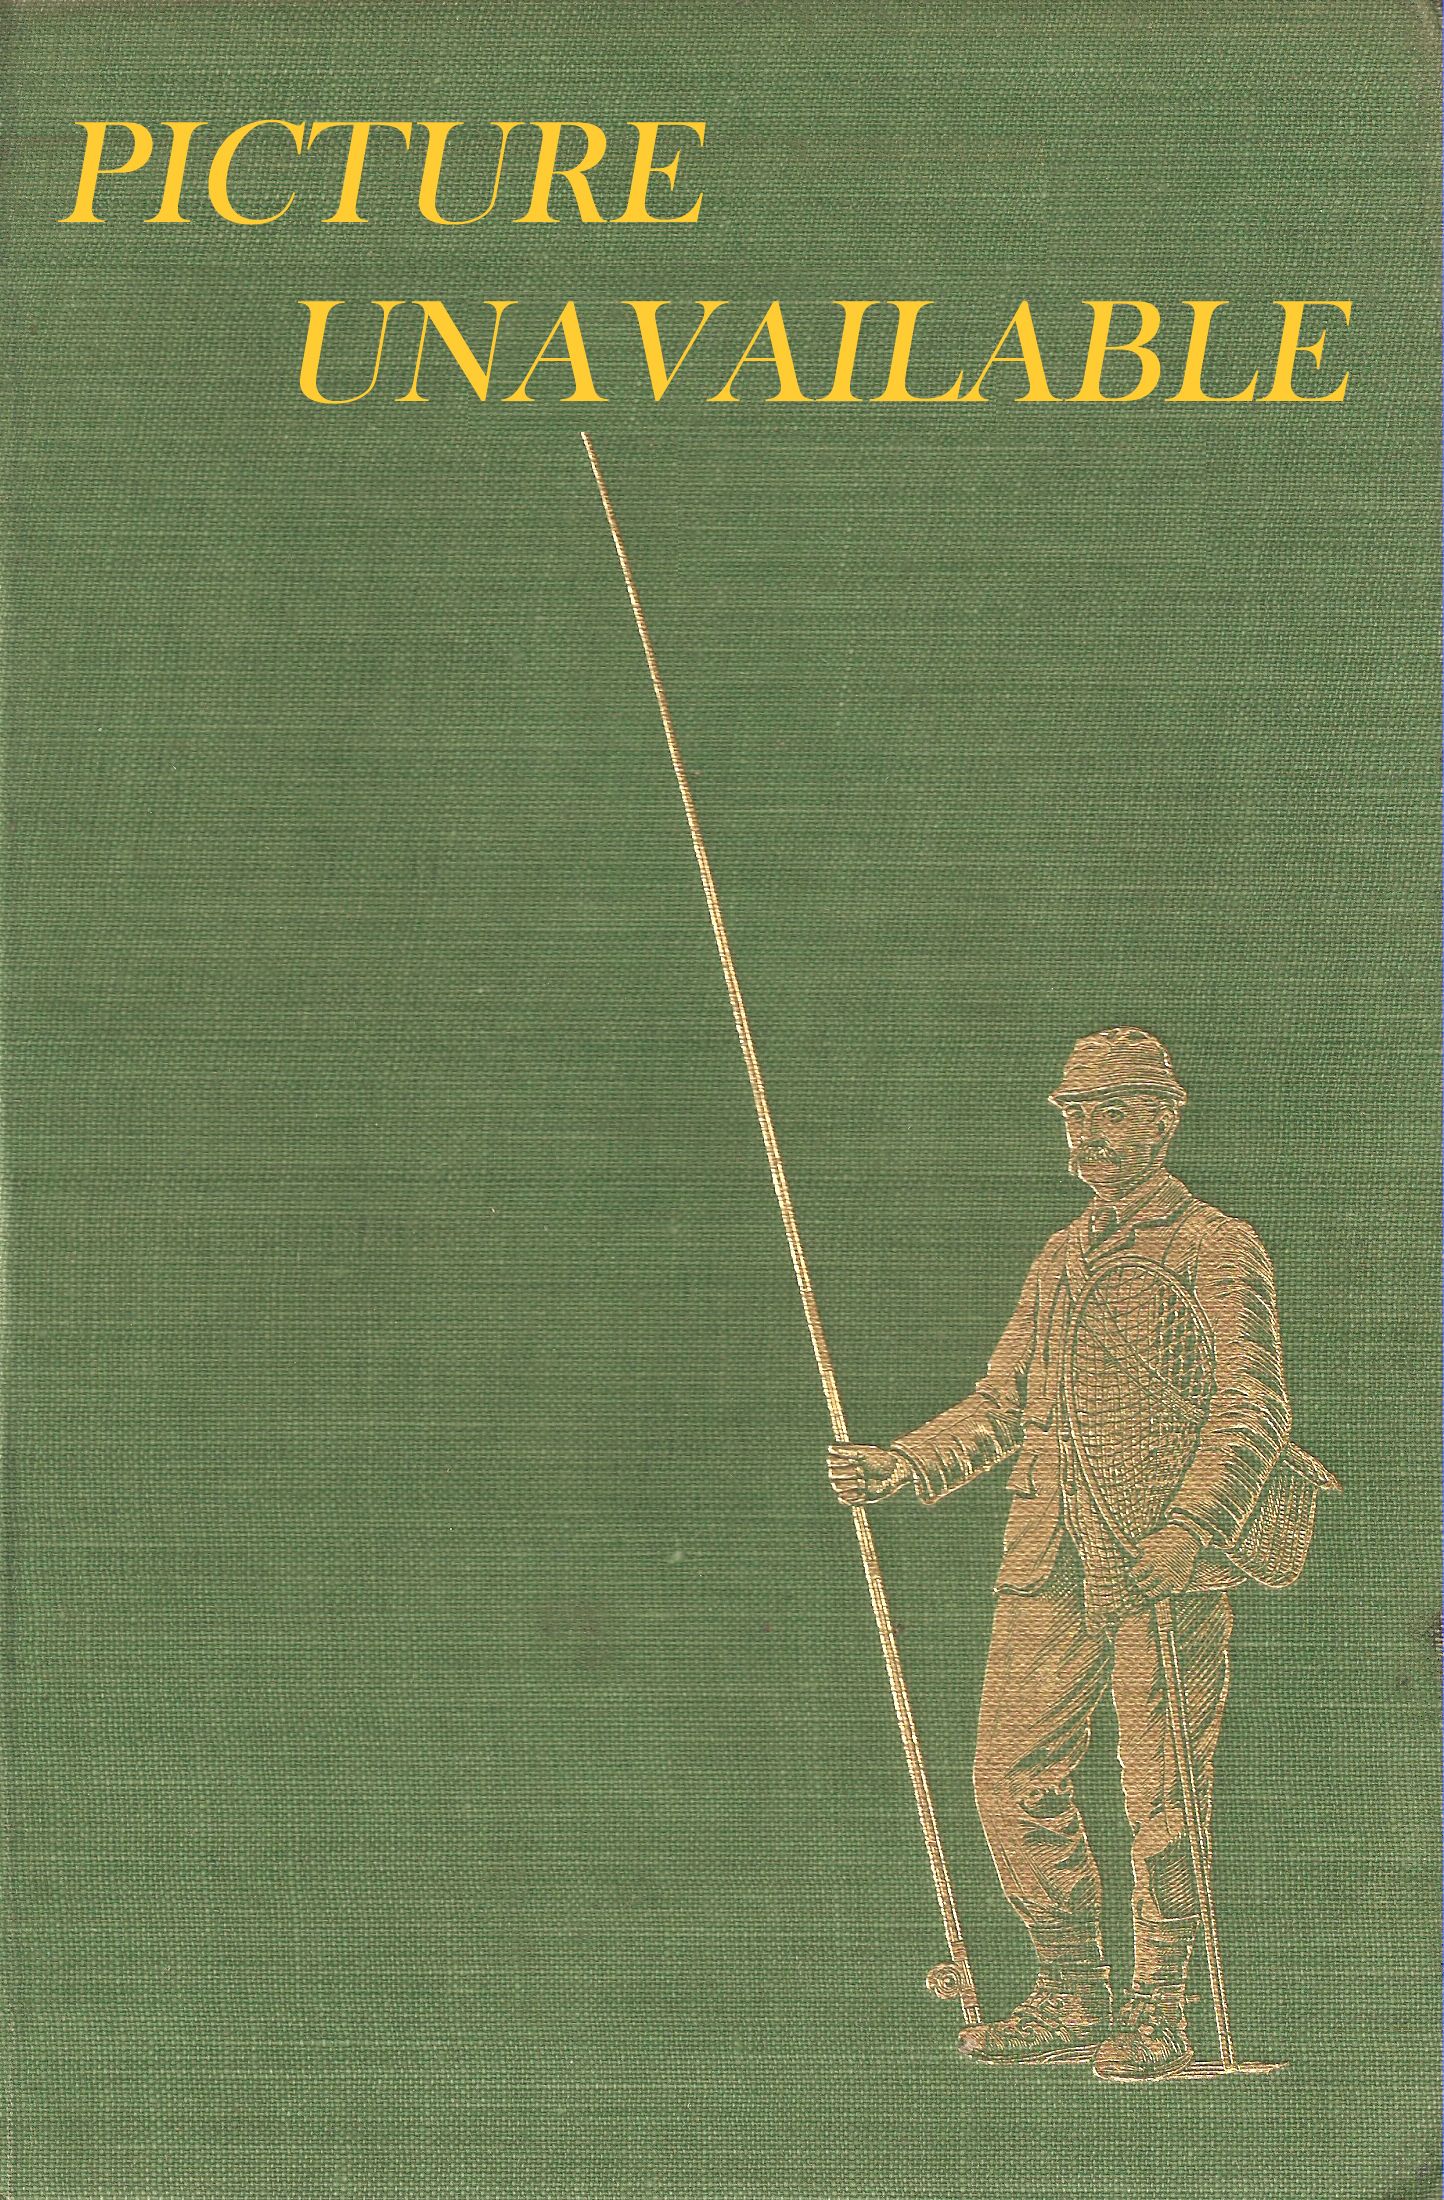 THE COMPLETE ANGLER. By Izaak Walton and Charles Cotton. A new illustrated  edition, with notes by G. Christopher Davies